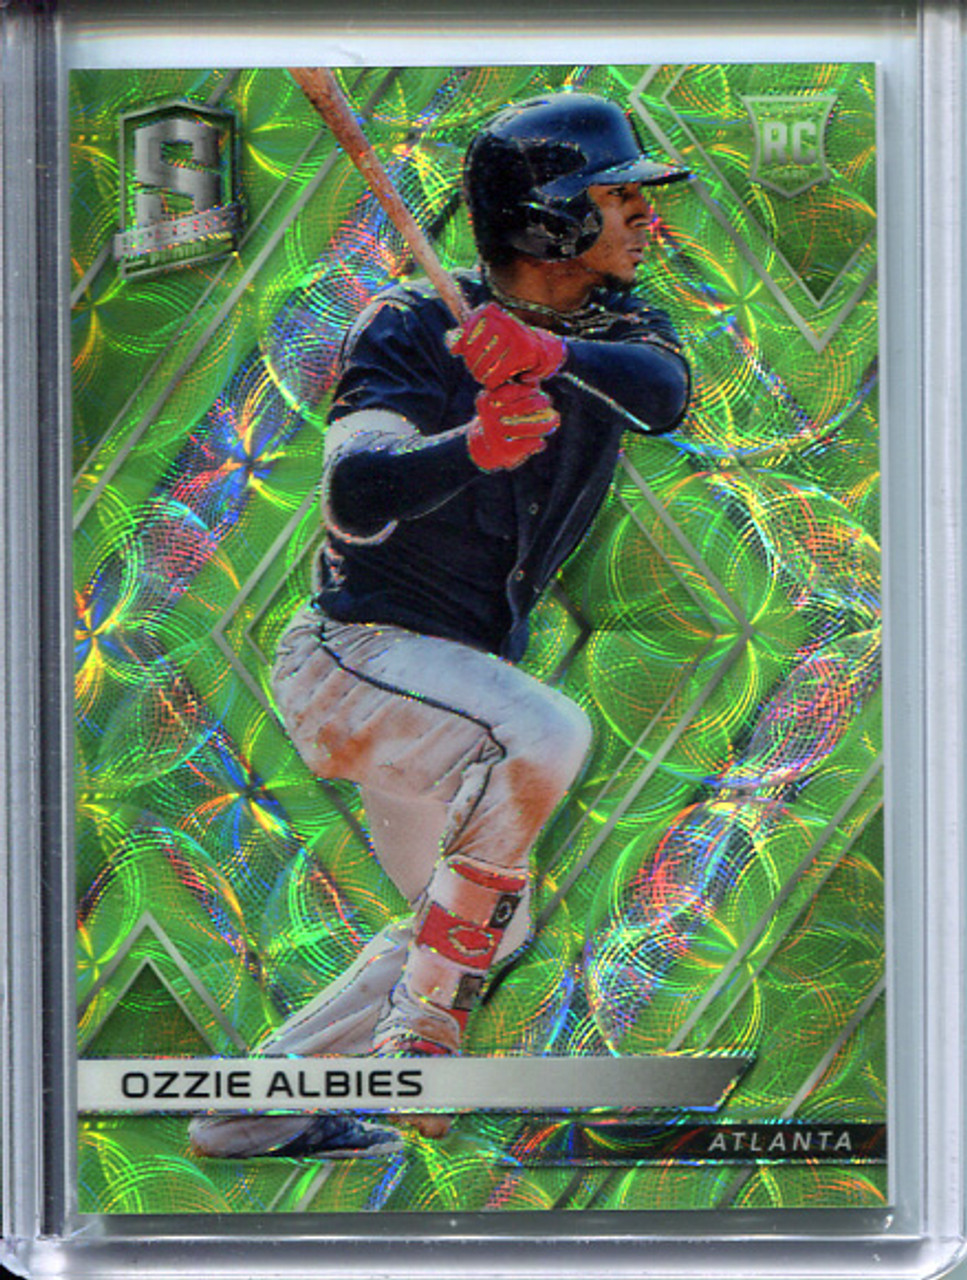 Ozzie Albies 2018 Chronicles, Spectra #49 Neon Green (#21/49)